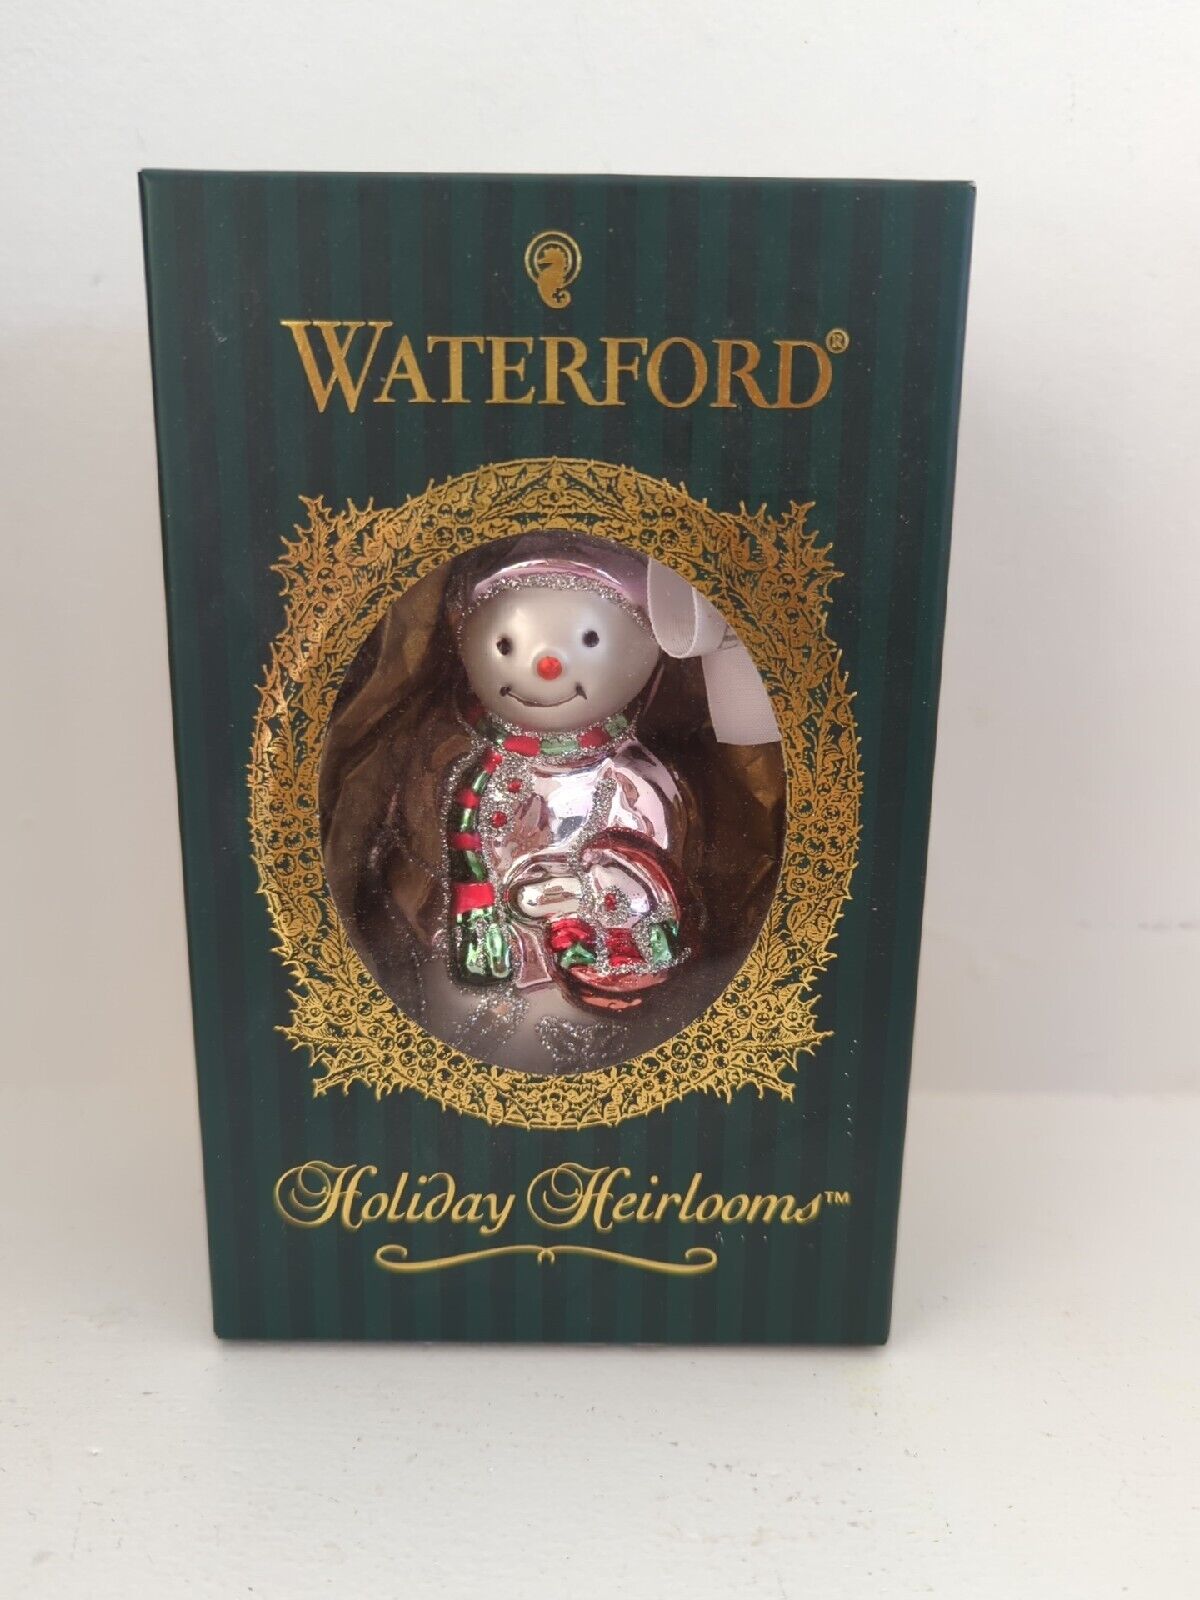 WATERFORD 2001  Ltd. Ed. Holiday Heirlooms “Lismore Lucy” Blown-Glass Ornament.